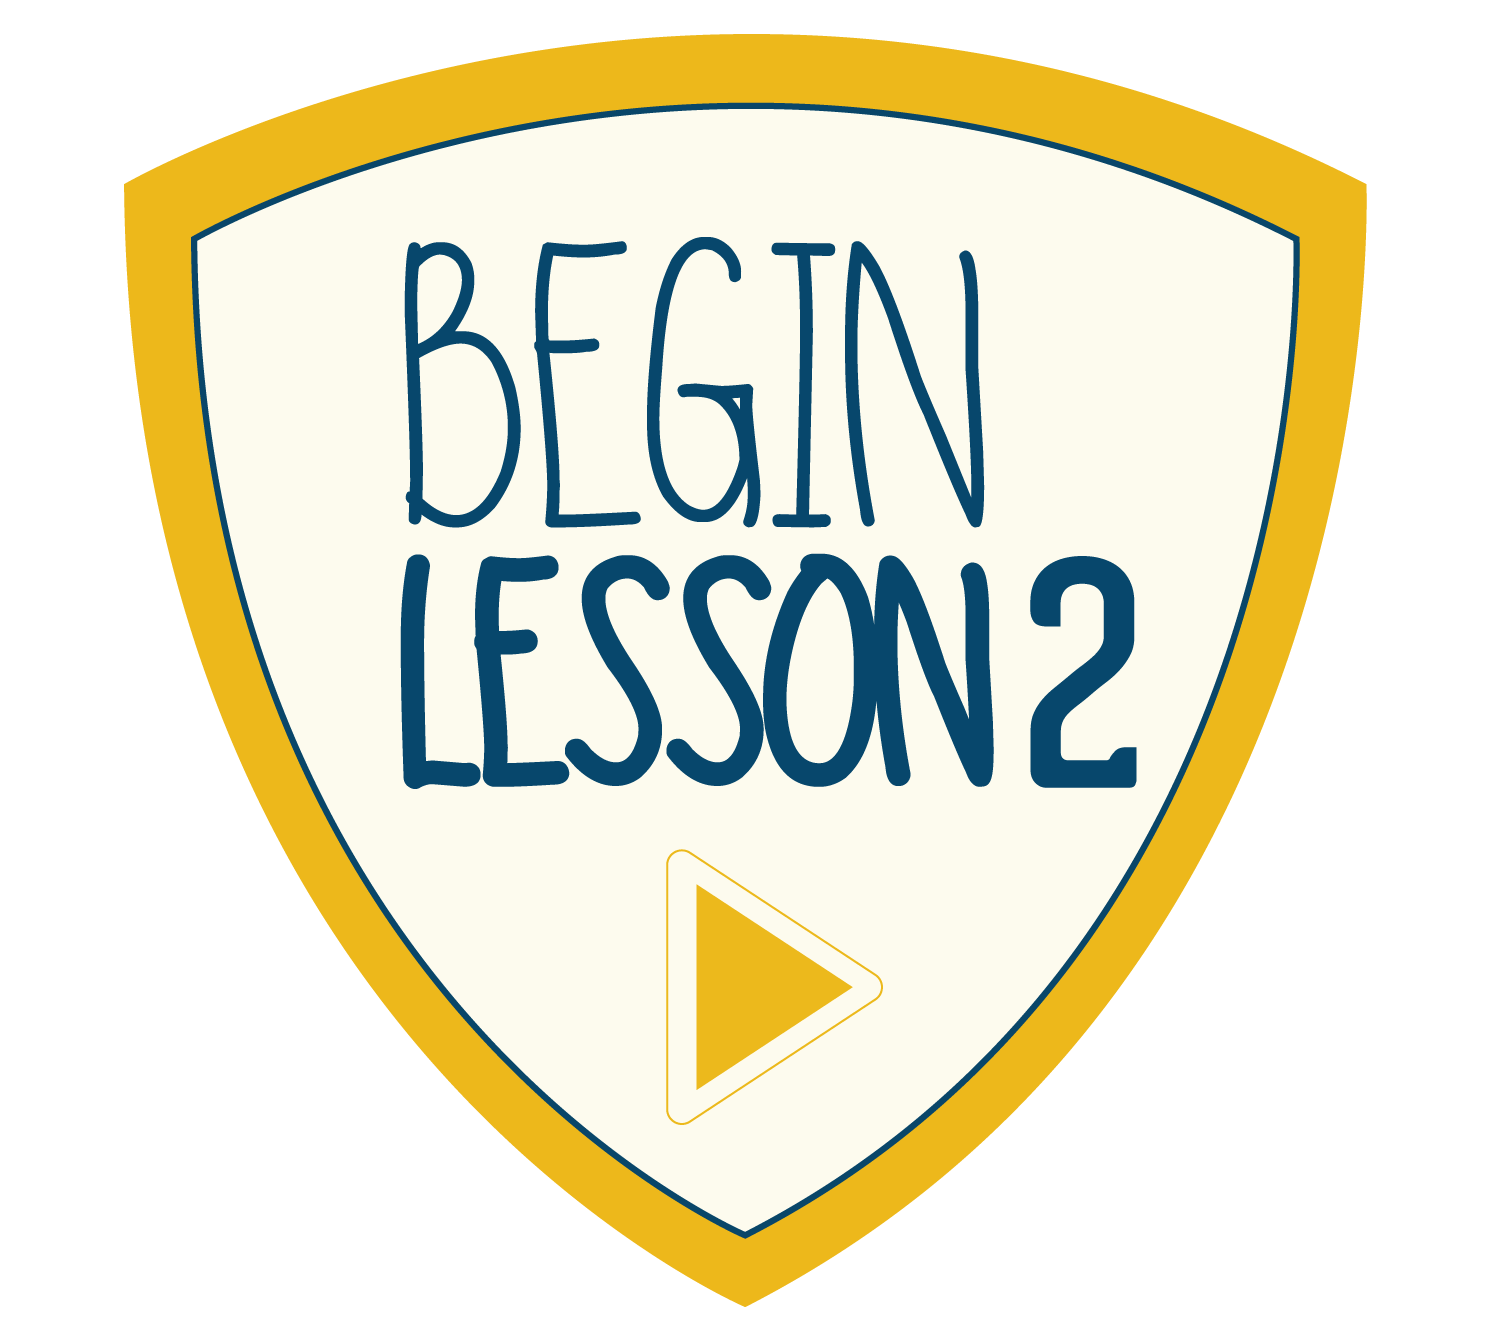 Begin lesson two